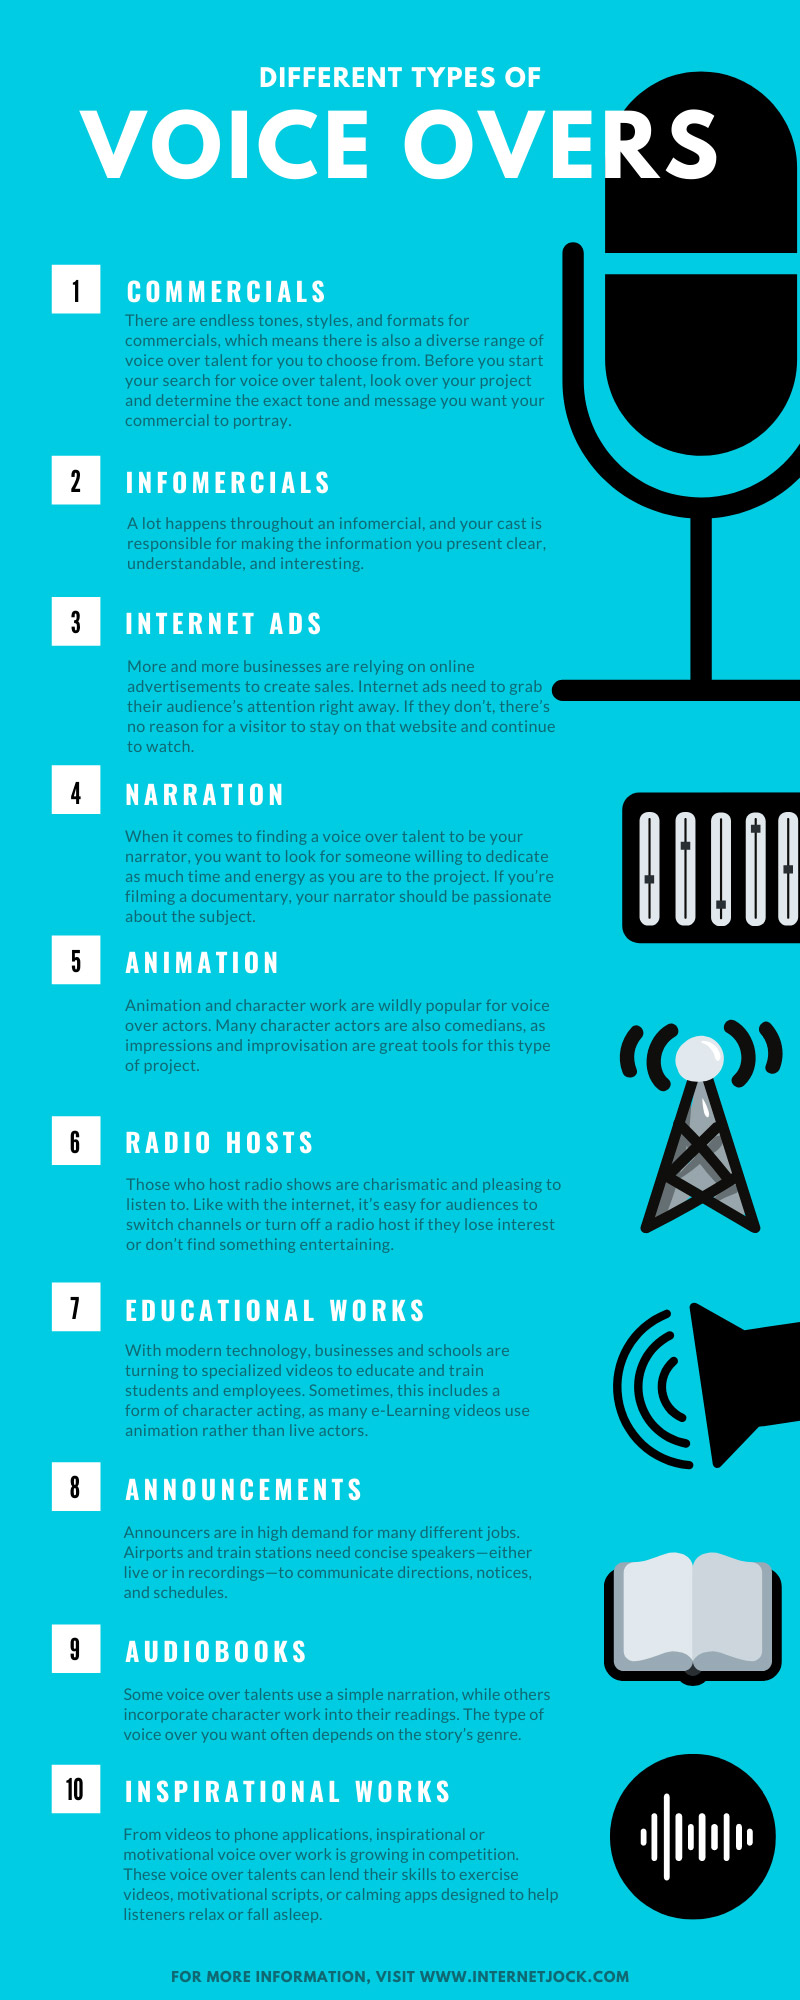 Different types of voiceovers